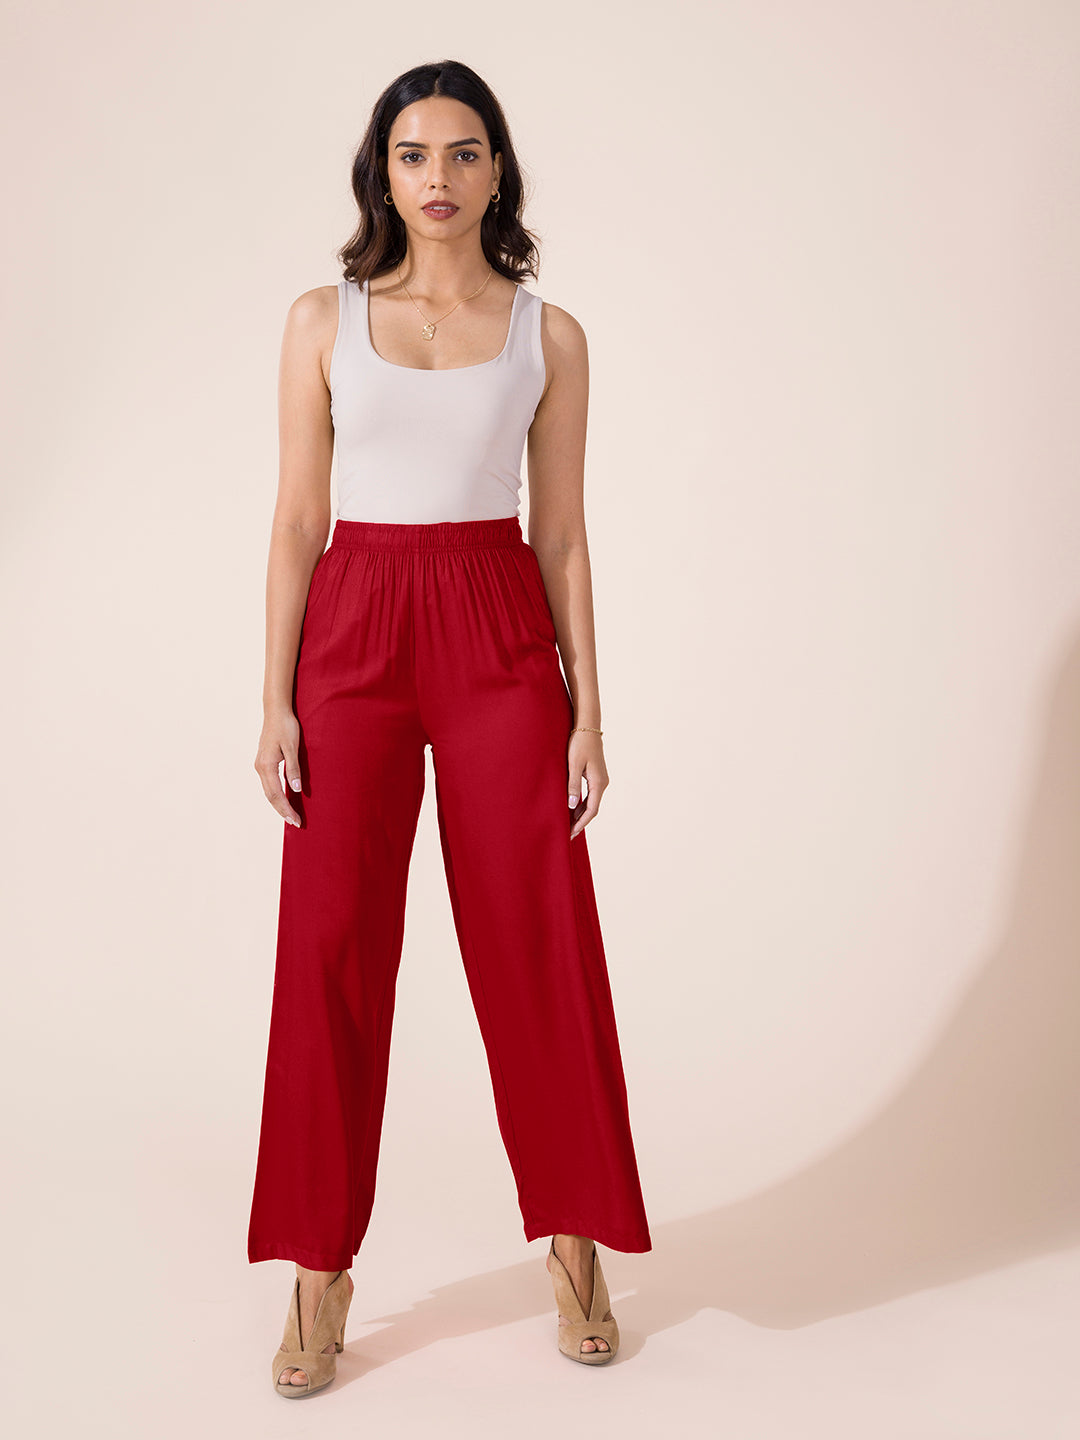 Red Crinkled Cropped Shirt With Wide Leg Pants | ADFY-SNCOORD-668 |  Cilory.com